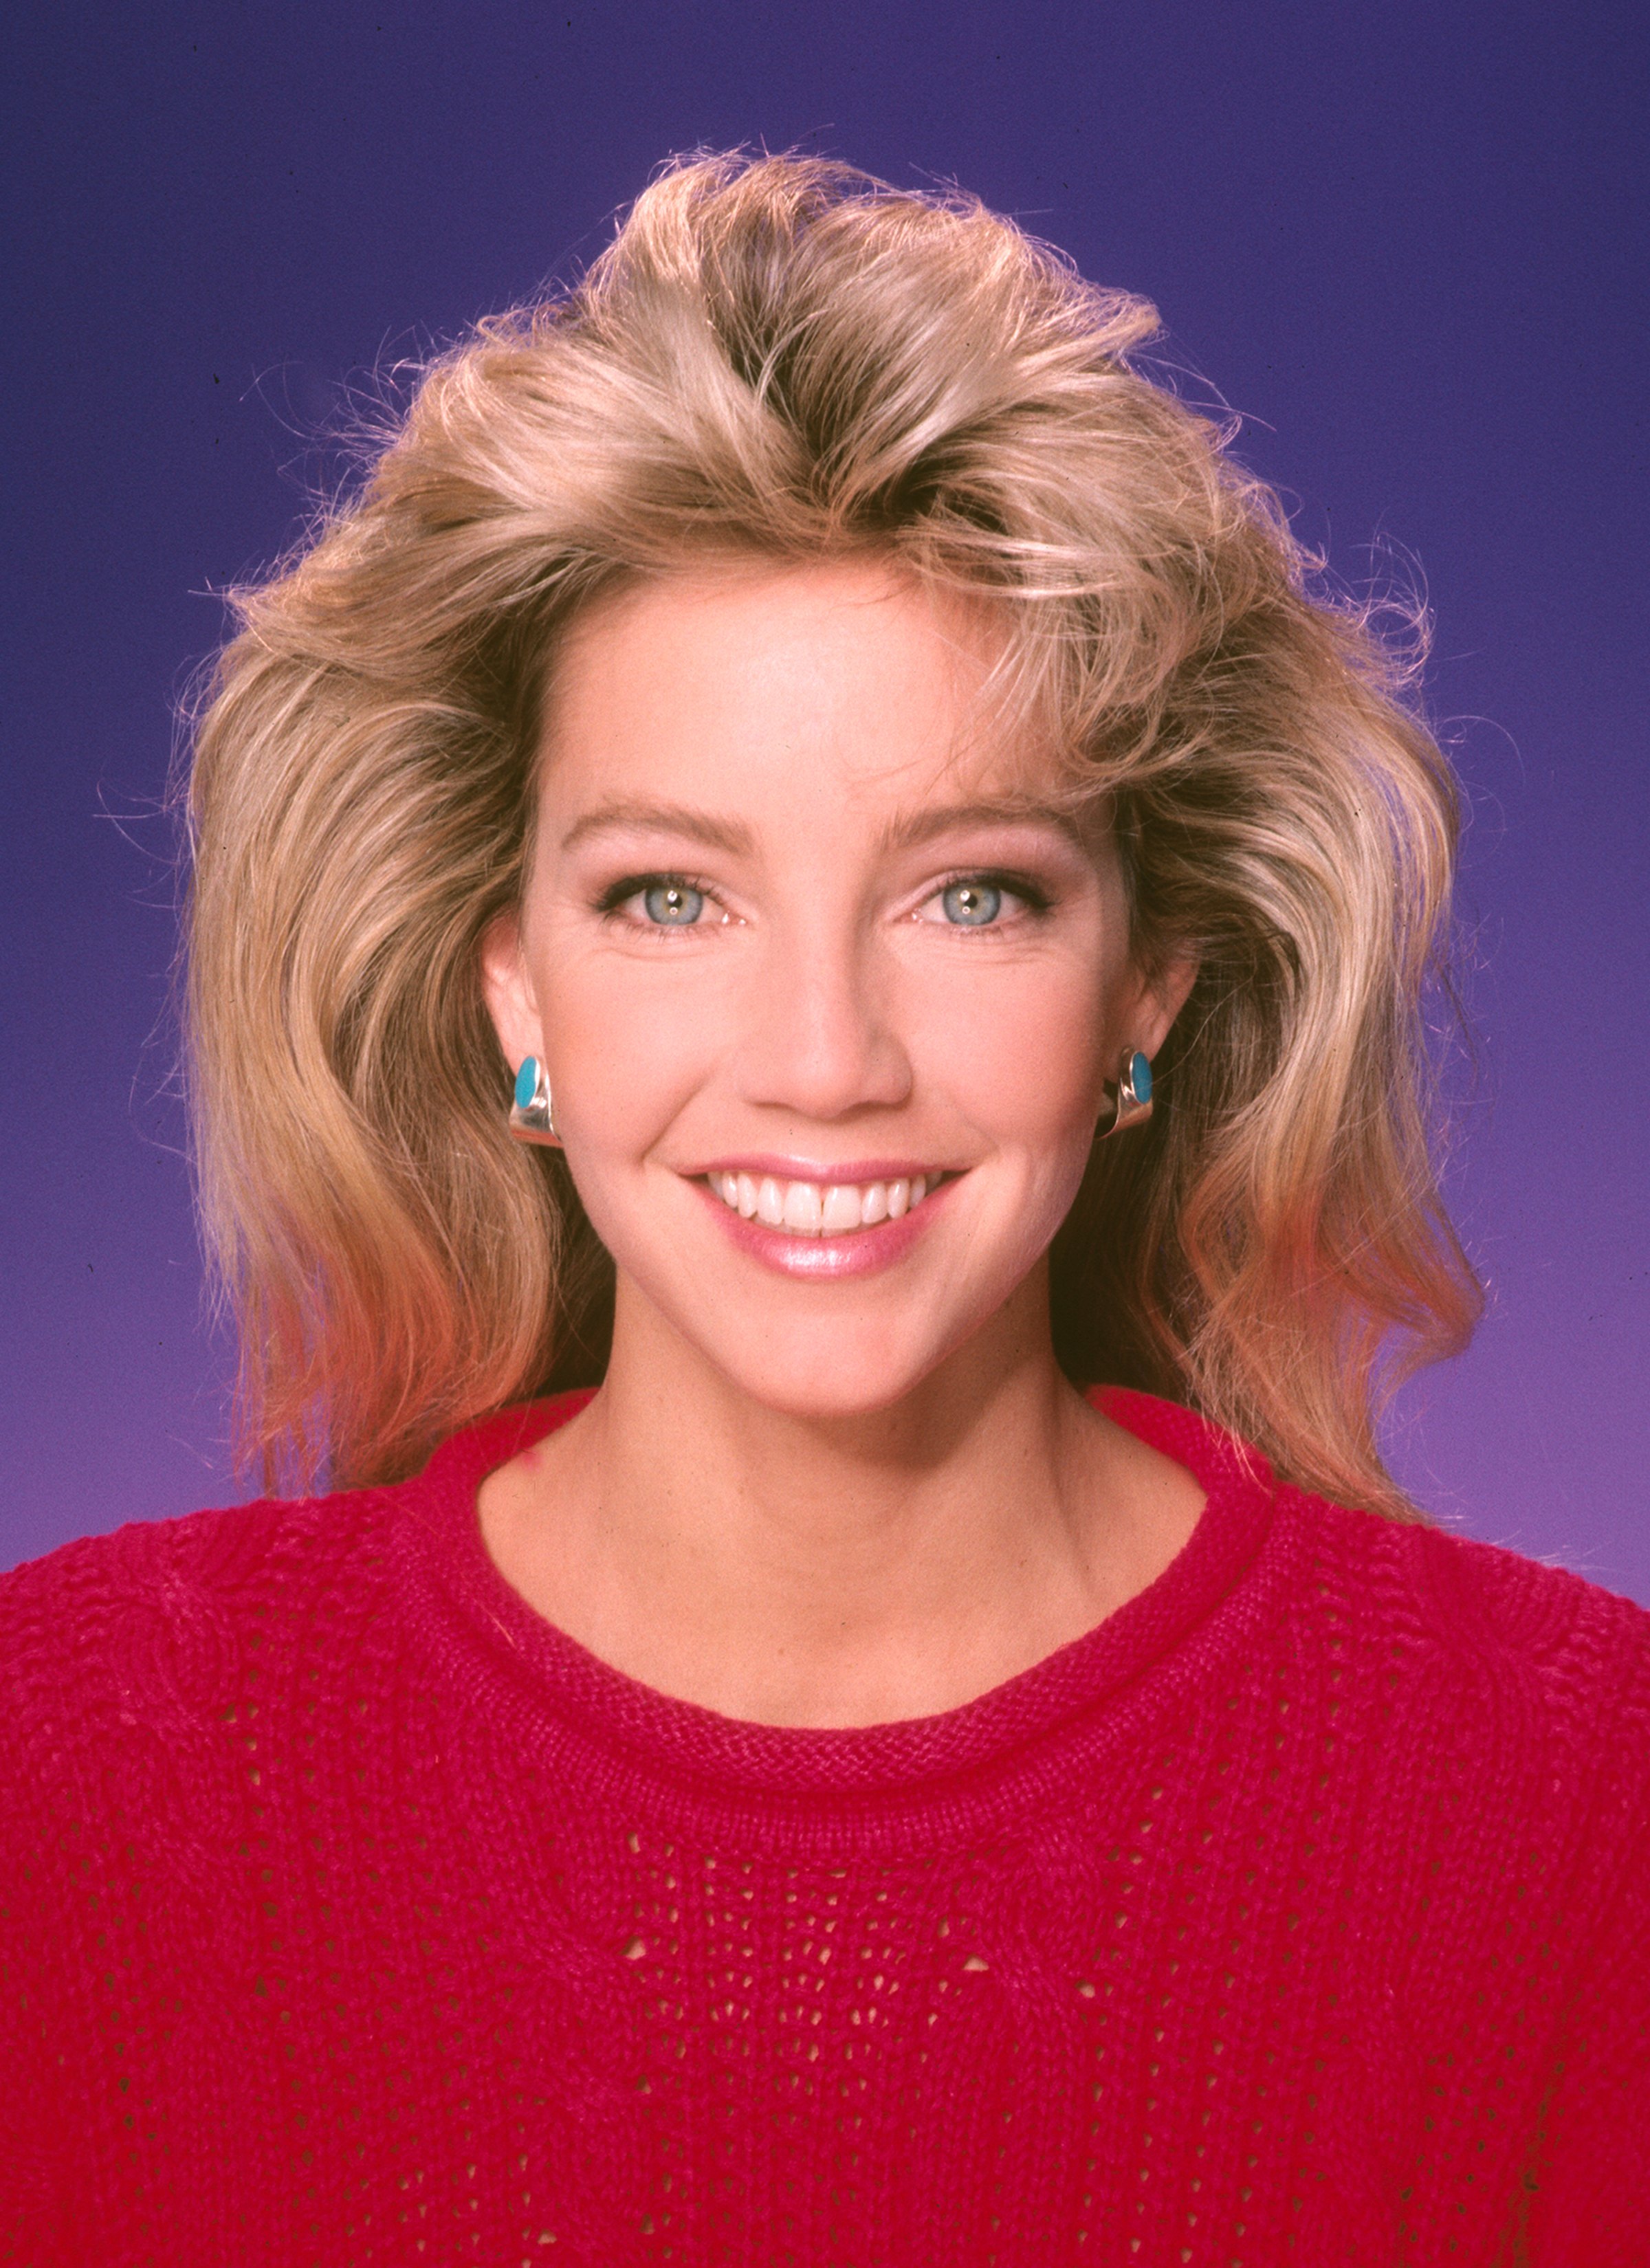 Heather Locklear poses for a portrait in 1987 in Los Angeles, California | Source: Getty Images